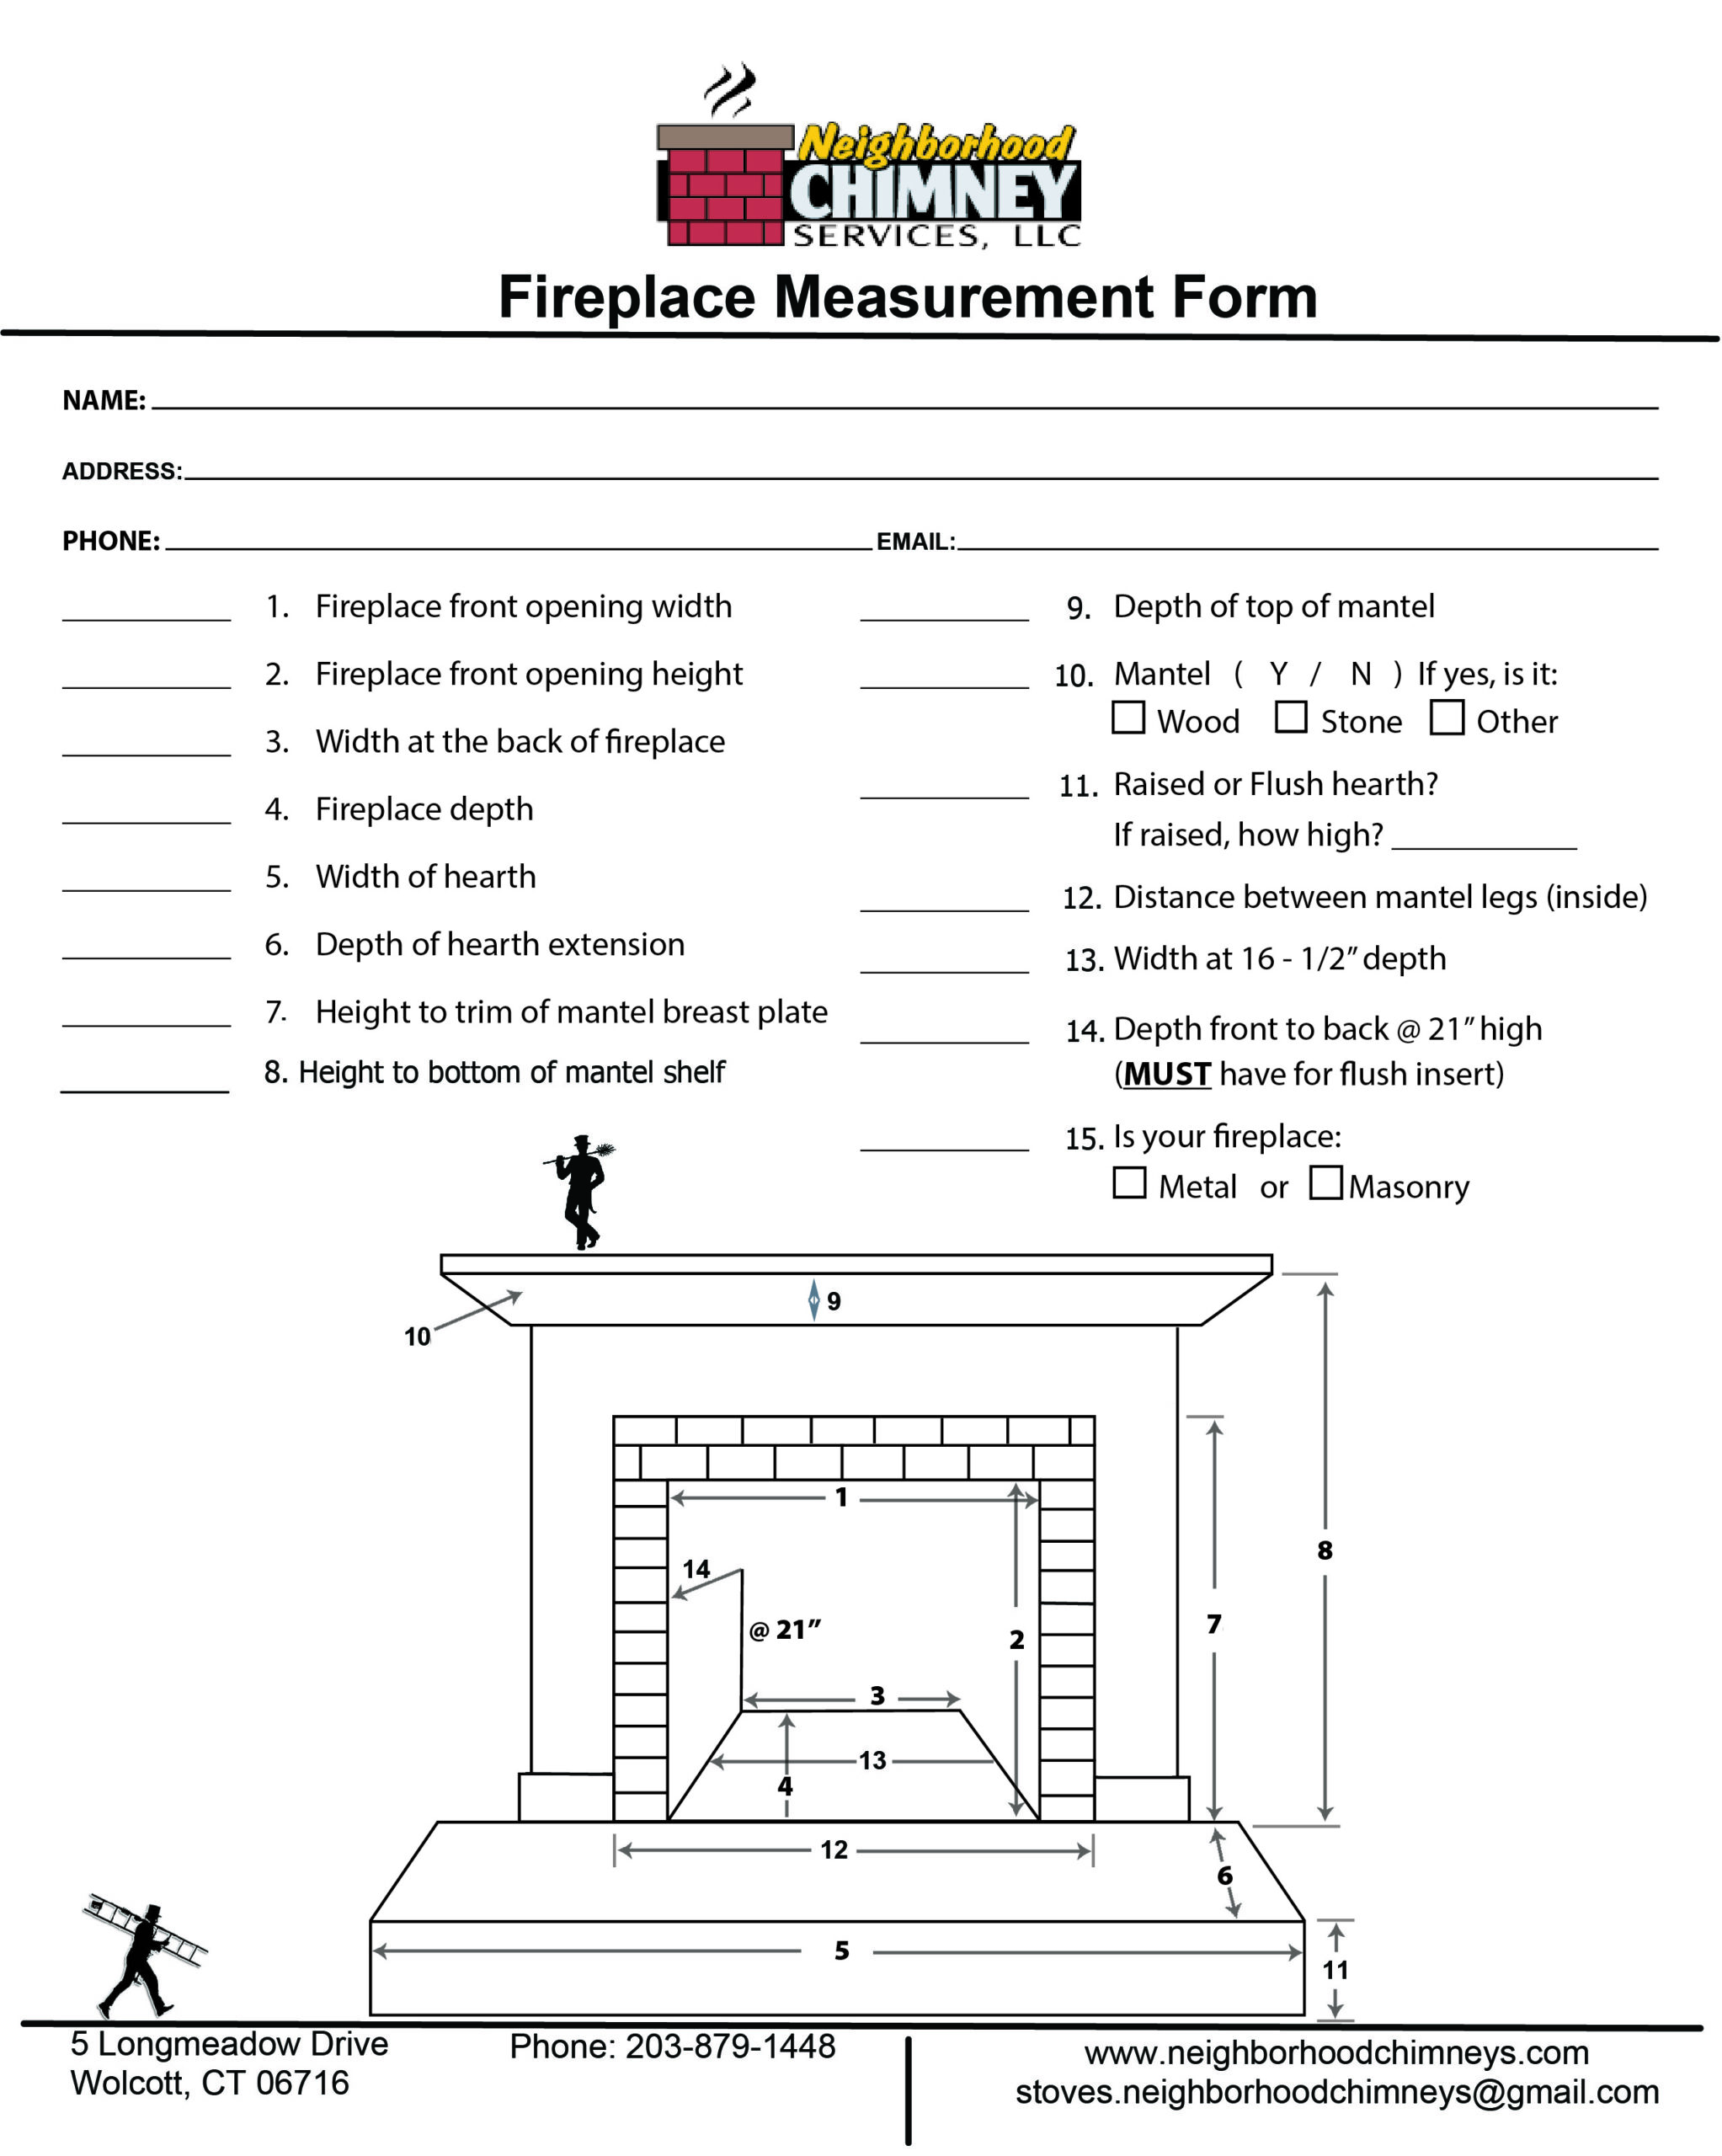 Fireplace Measurement Form scaled